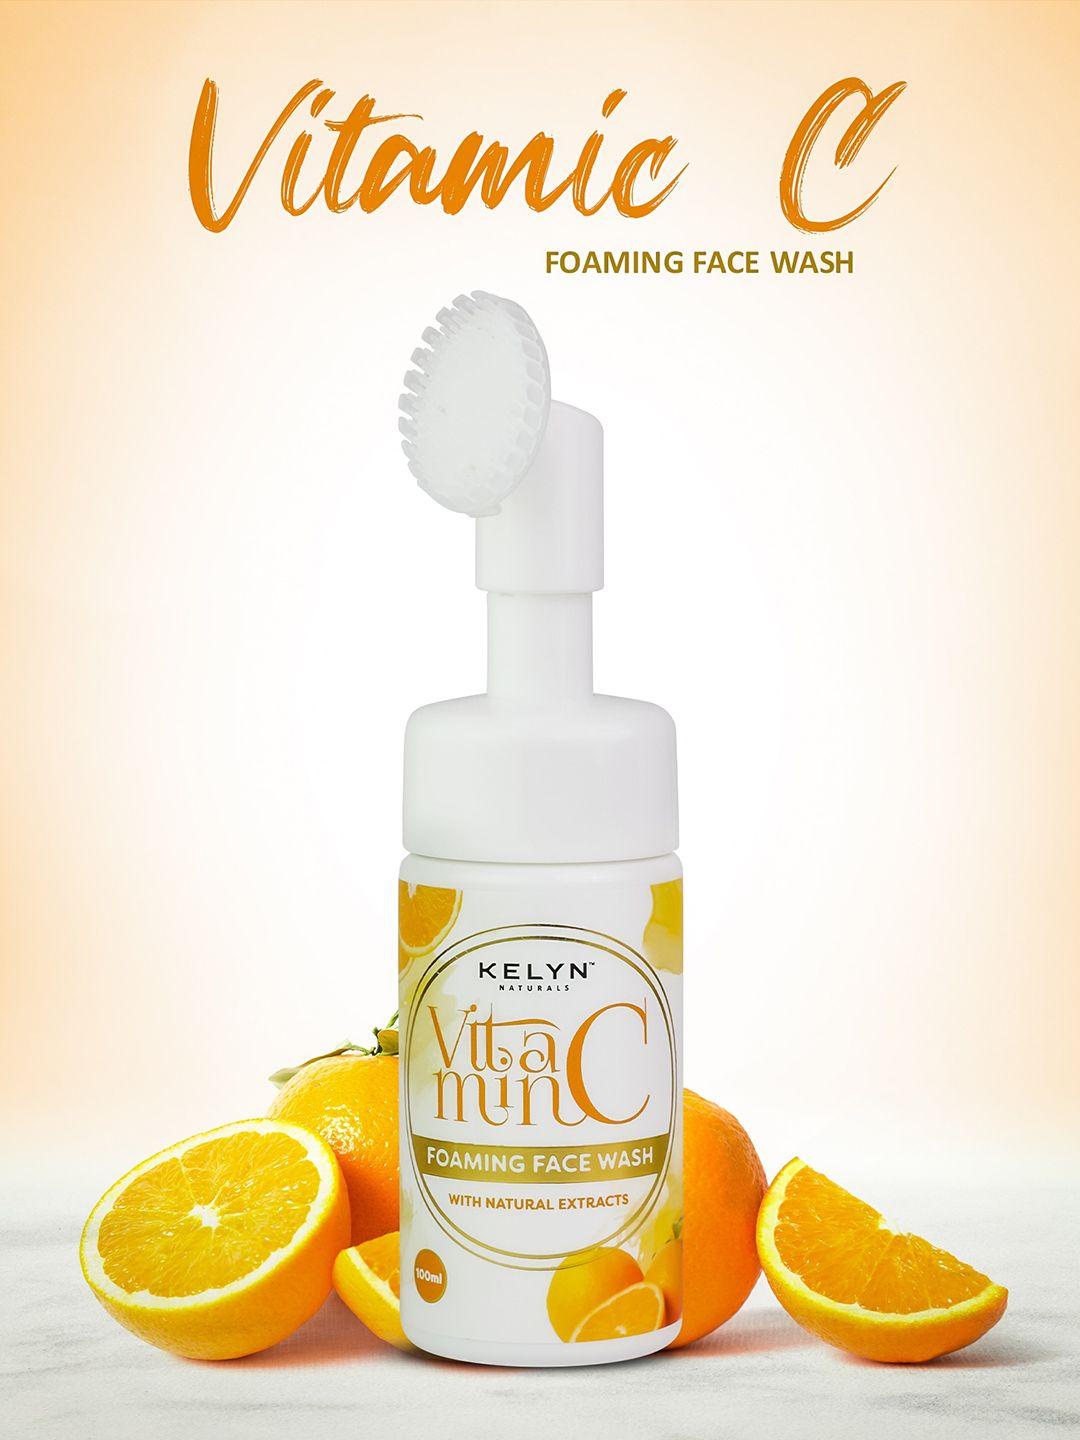 kelyn set of 2 vitamin c foaming face wash with built-in face brush - 100ml each